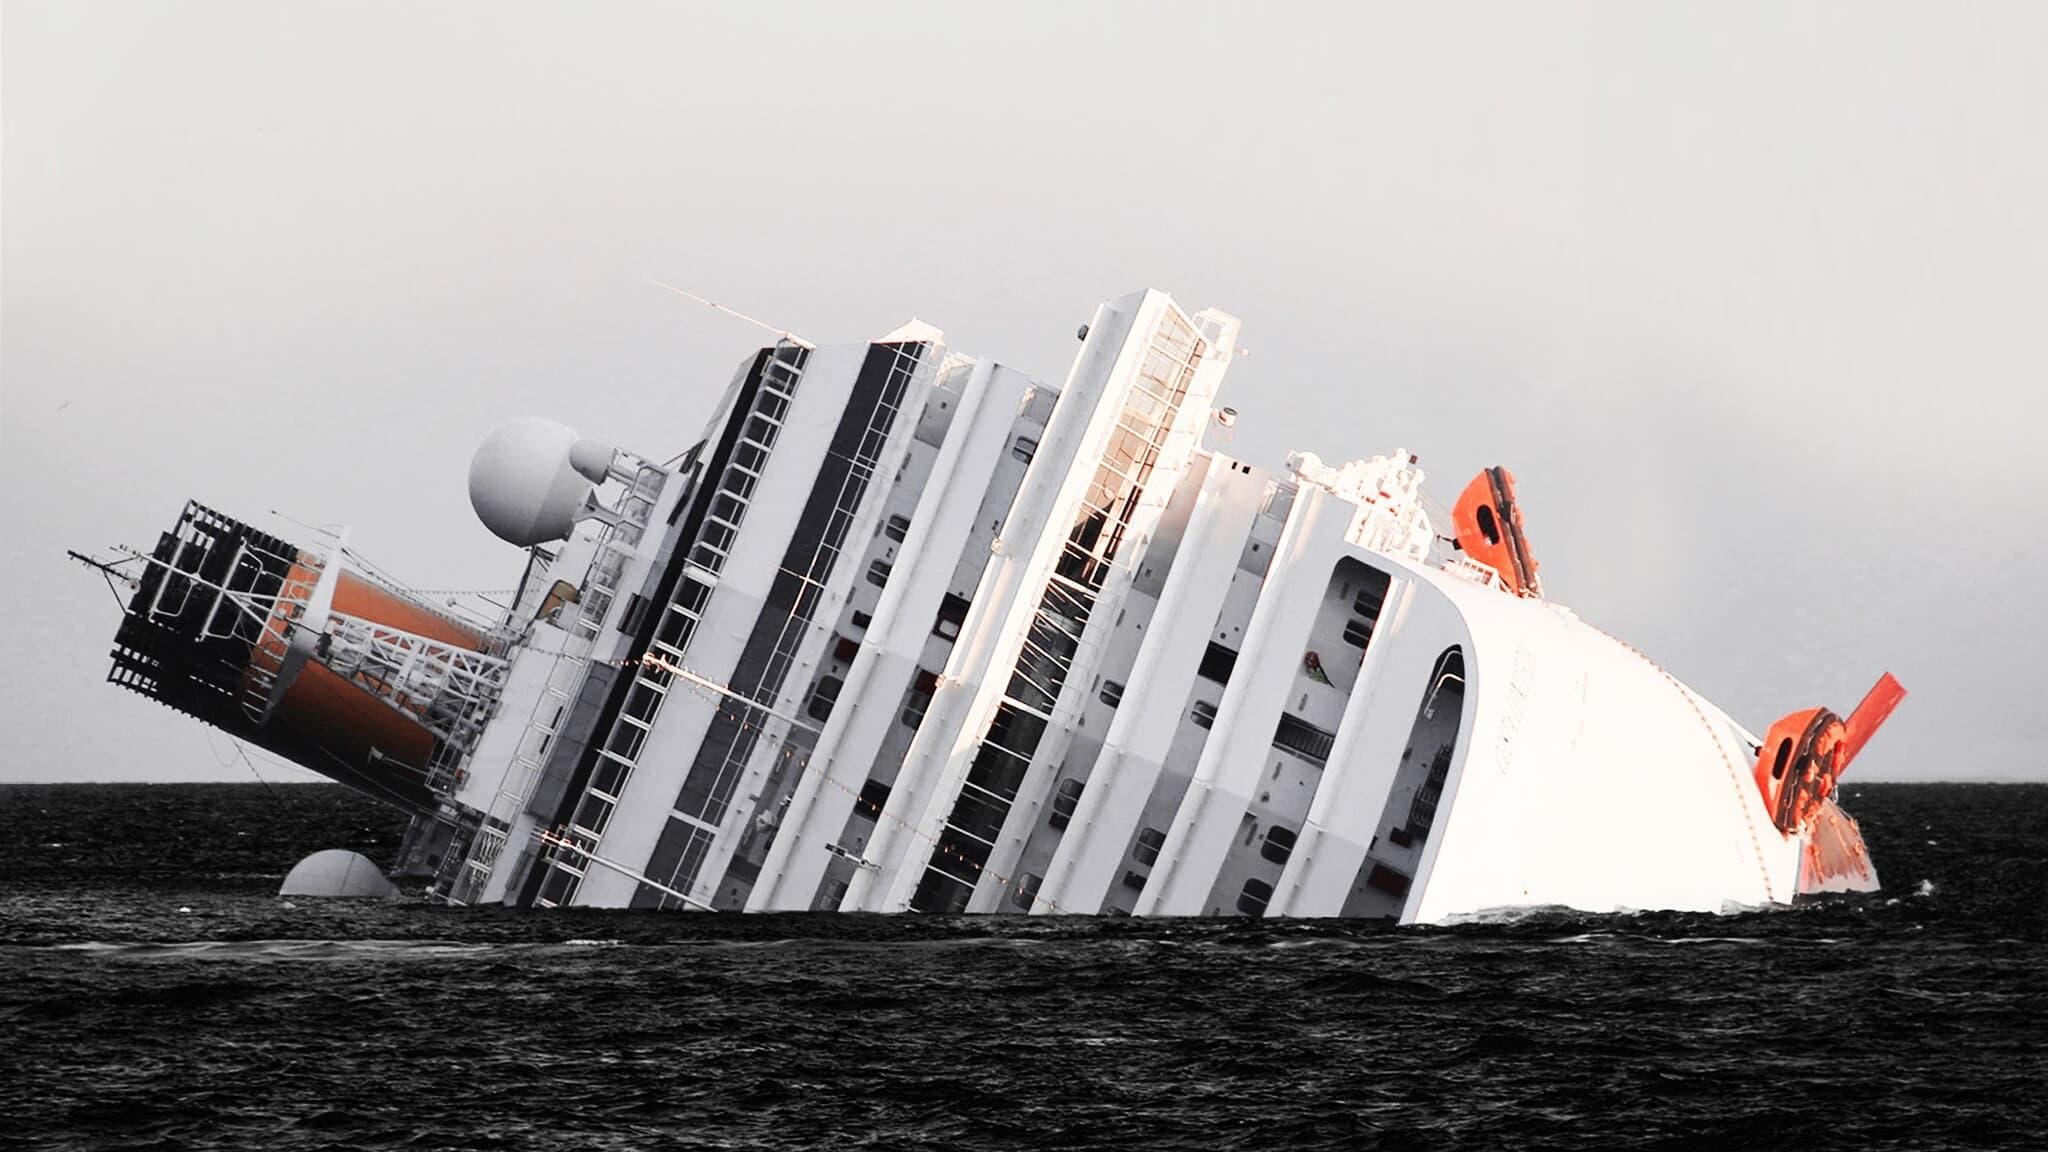 Costa Concordia: Chronicle of a Disaster backdrop